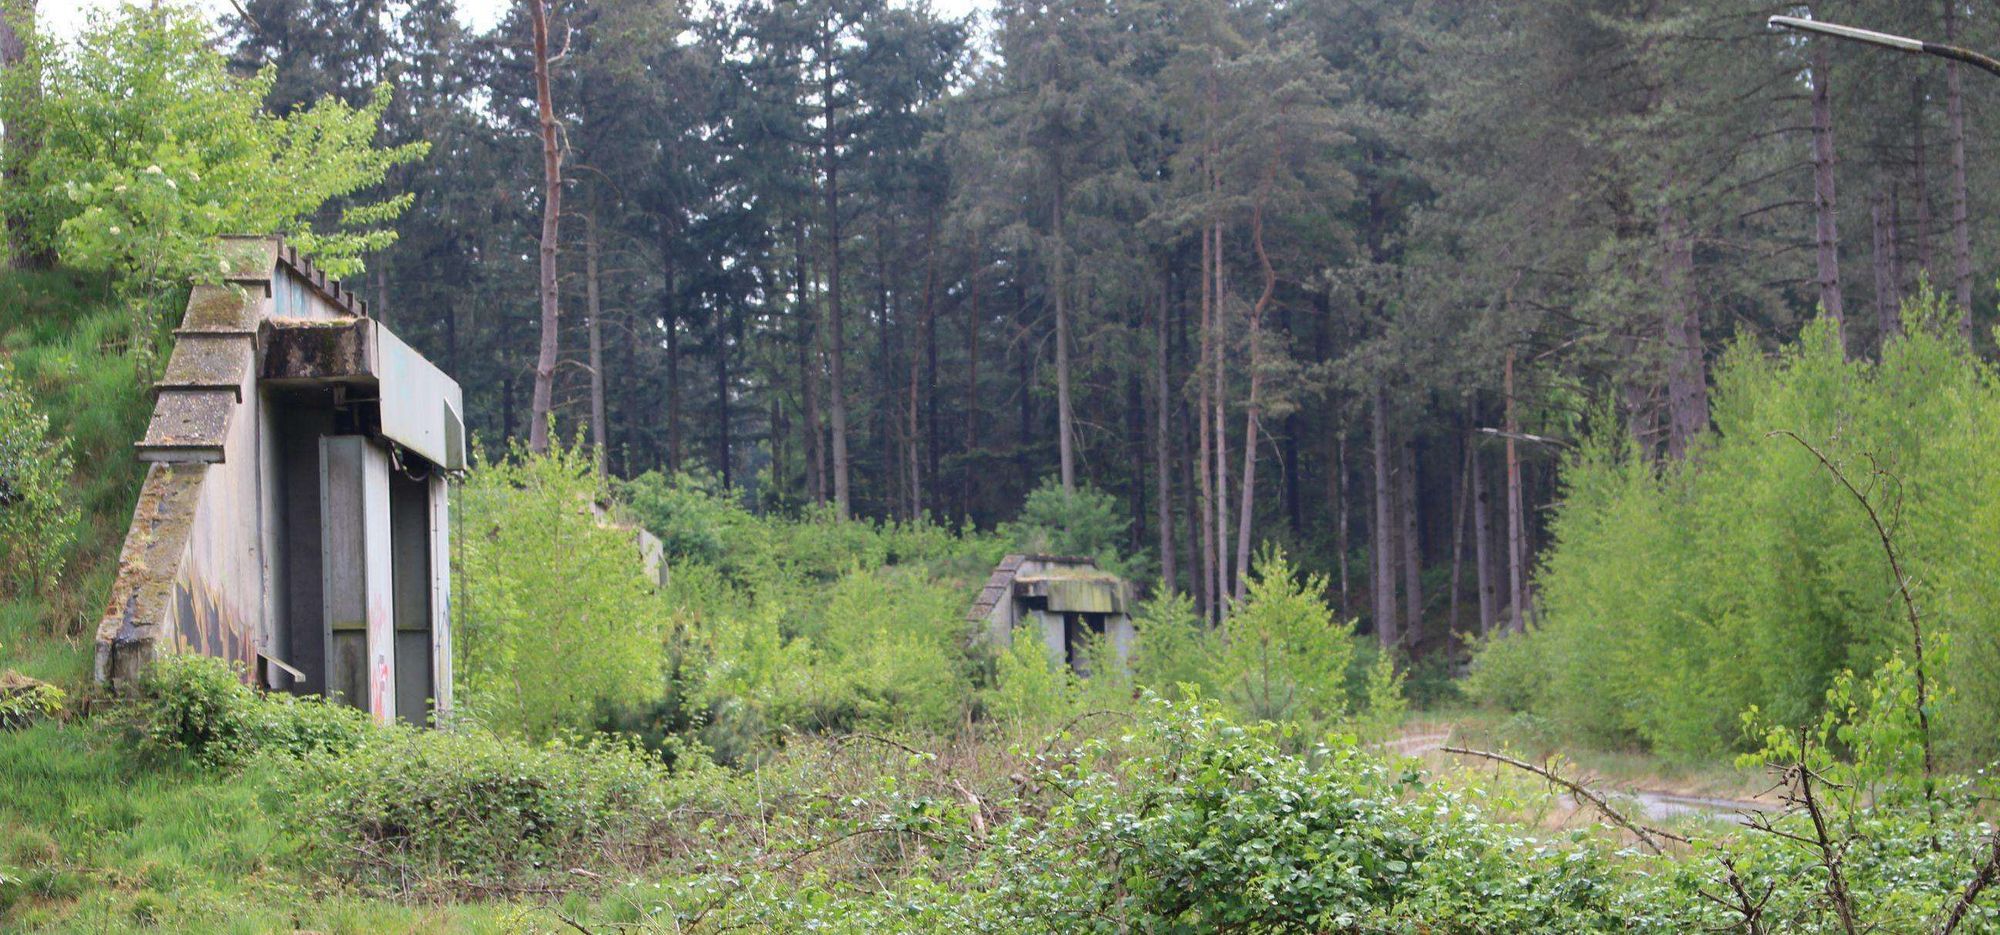 a photograph of bunkers in a former munitions depot